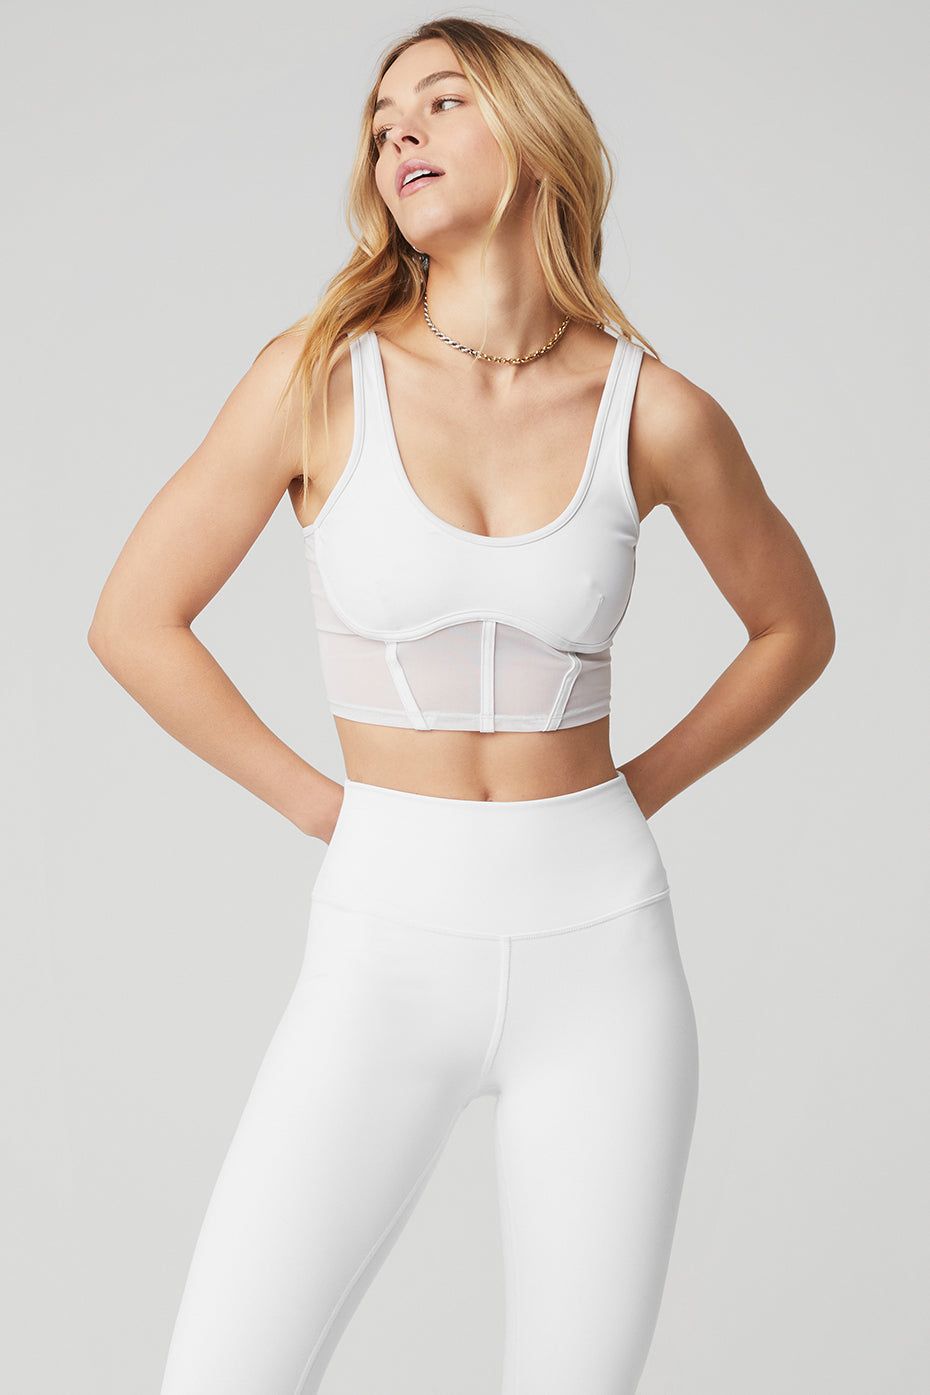 Quinny Yoga Clothing - Alo Interlace Sport Bra Merk Alo Model Interlace Bra  Coulour White Size XS Price IDR 700.000 Brand New Ready Stock Limited Stock  Grab it before its gone Happy